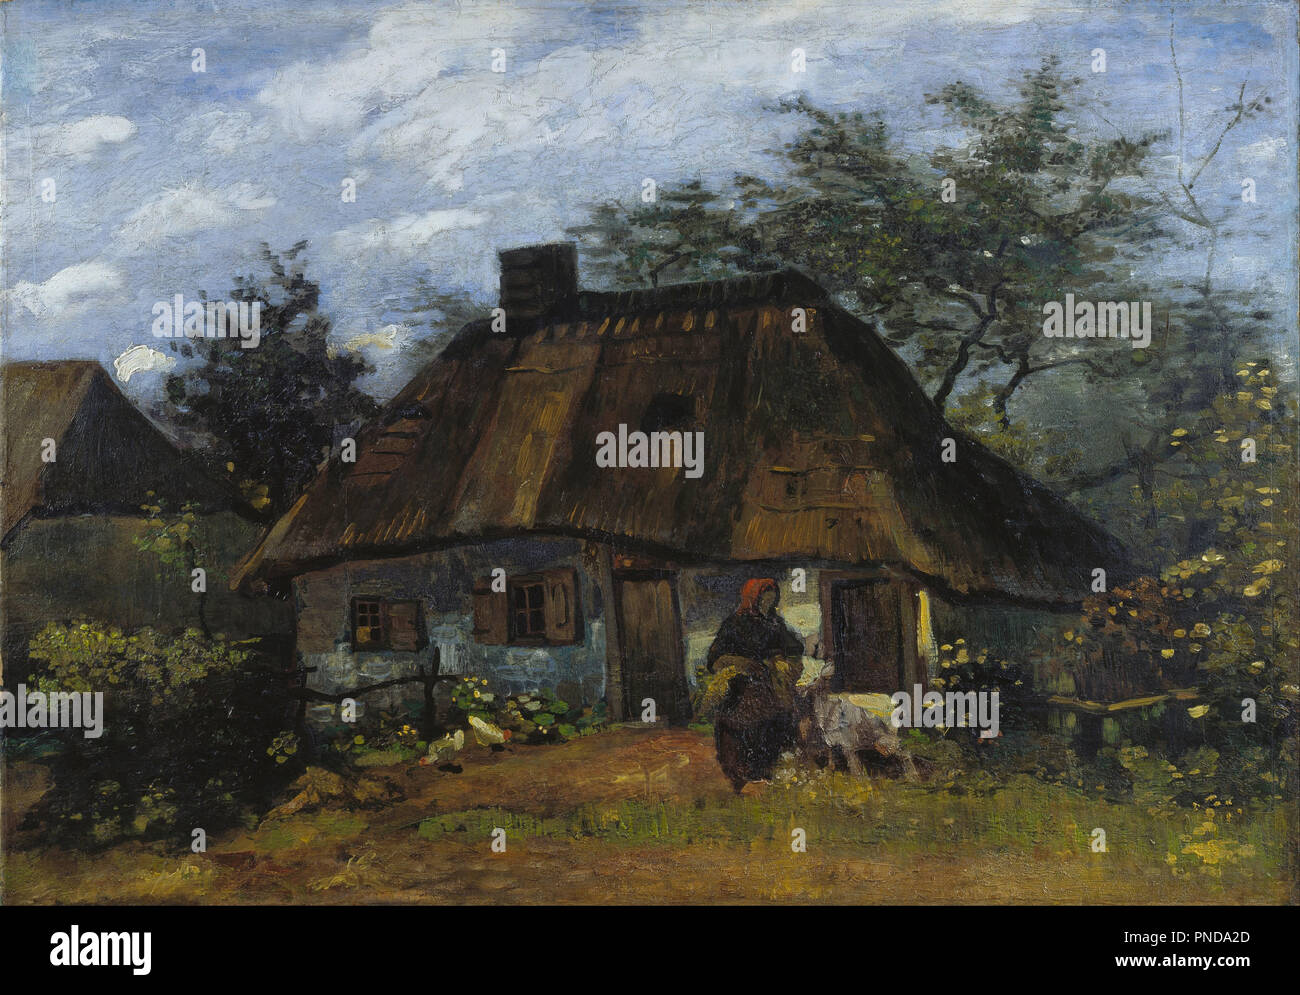 Cottage and Woman with Goat / Farmhouse in Nuenen (La Chaumiére). Date/Period: Nuenen, June 1885 - July 1885. Painting. Oil on canvas. Height: 60 cm (23.6 in); Width: 85 cm (33.4 in). Author: VINCENT VAN GOGH. Stock Photo